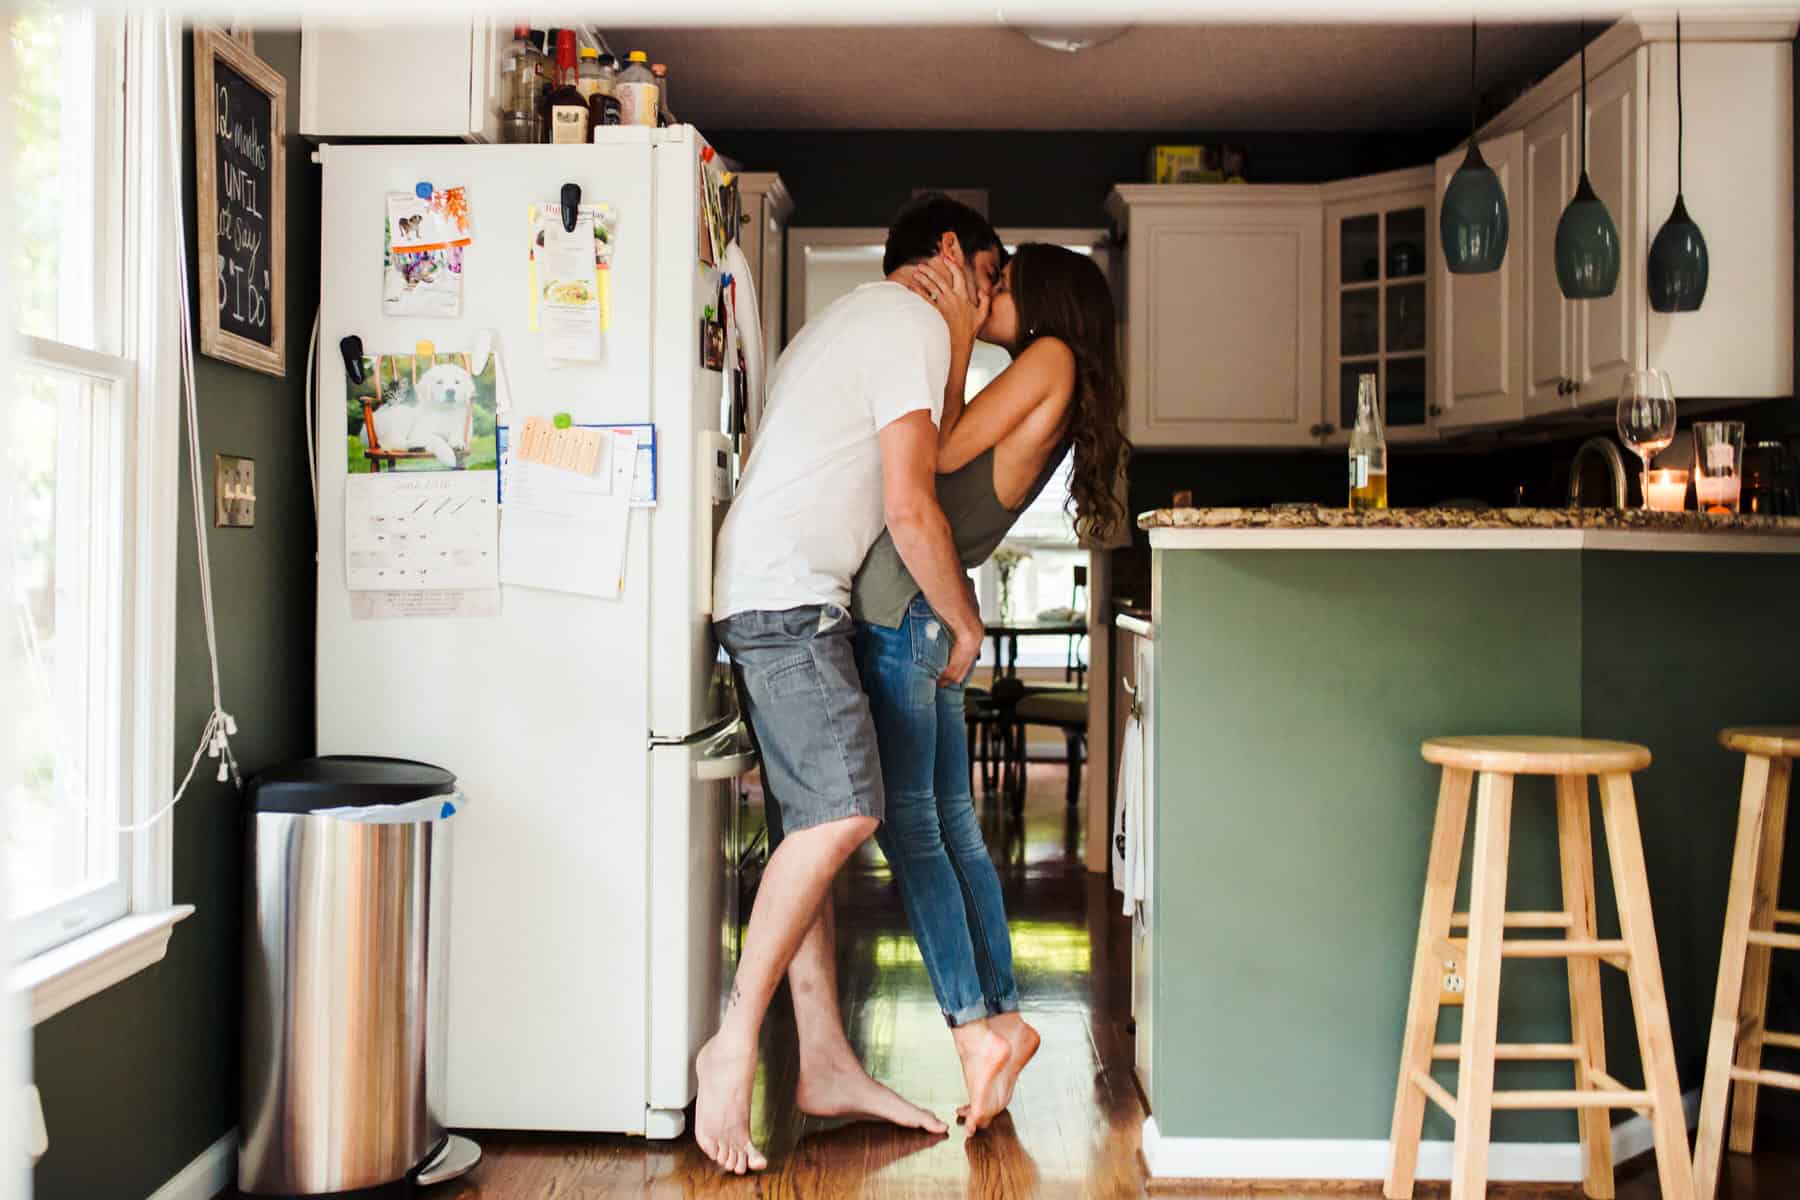 Engagement Session located in their home